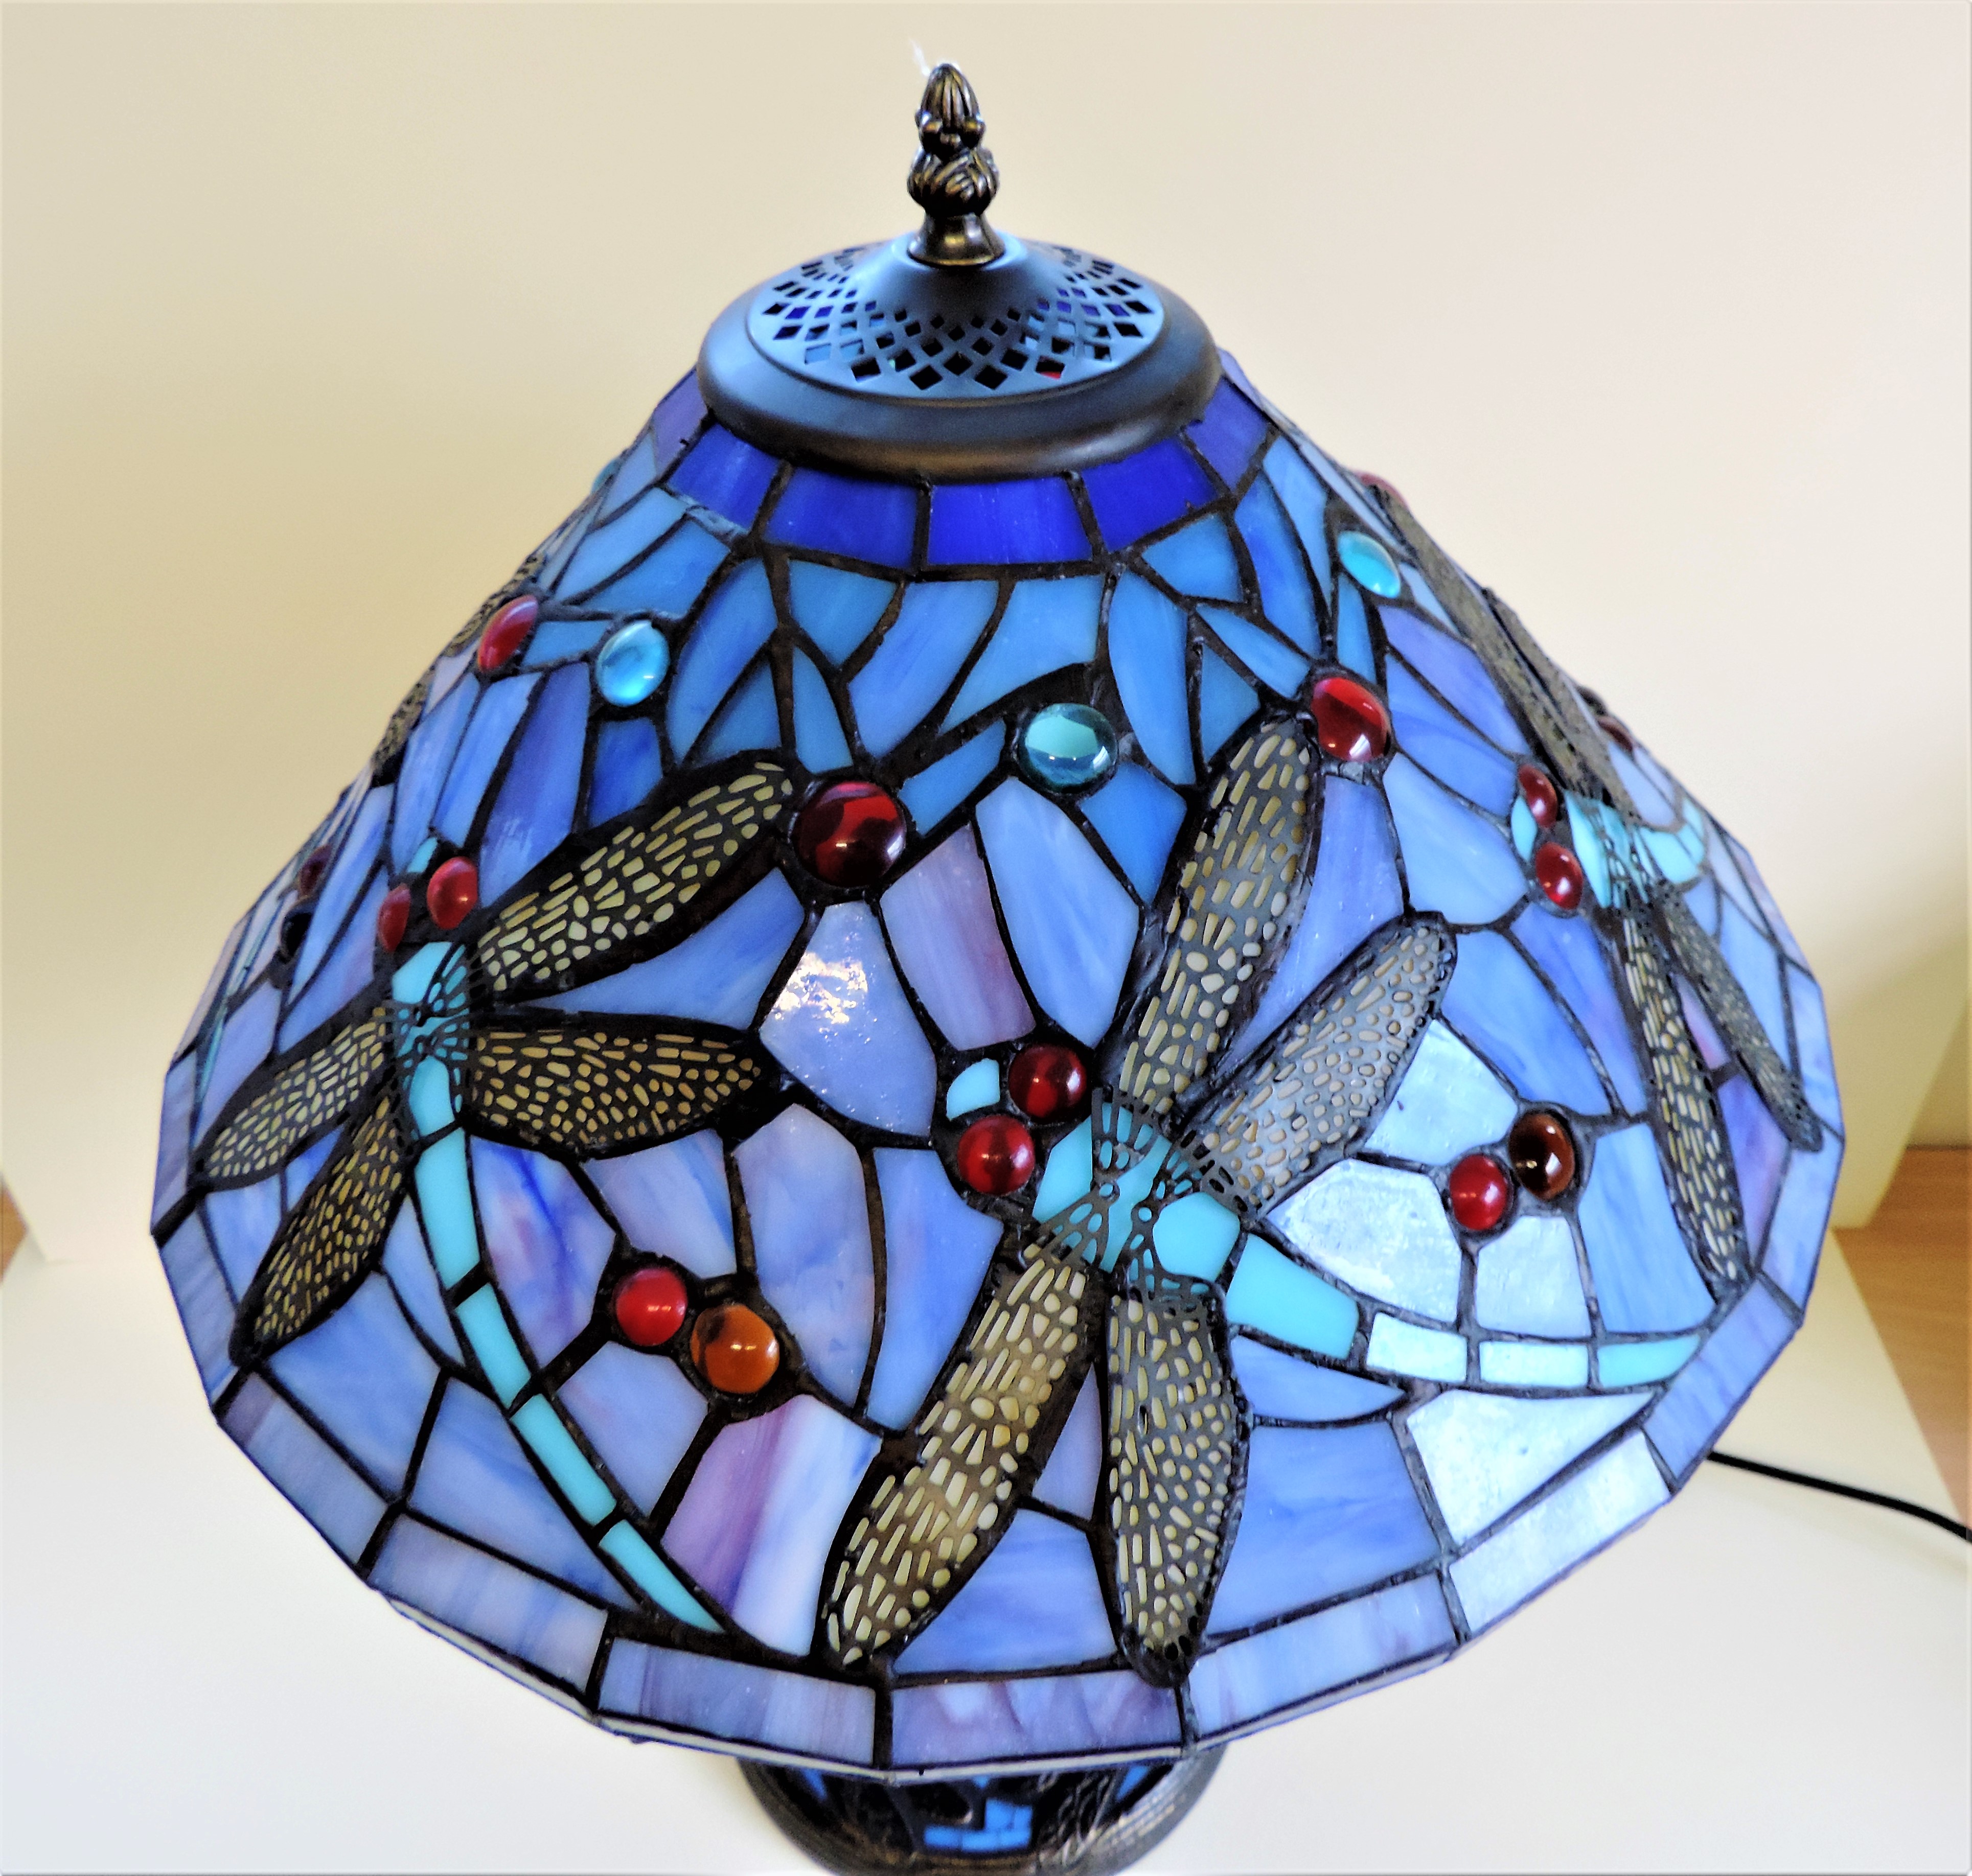 22inch Tall Dragonfly Tiffany Lamp - Image 2 of 6